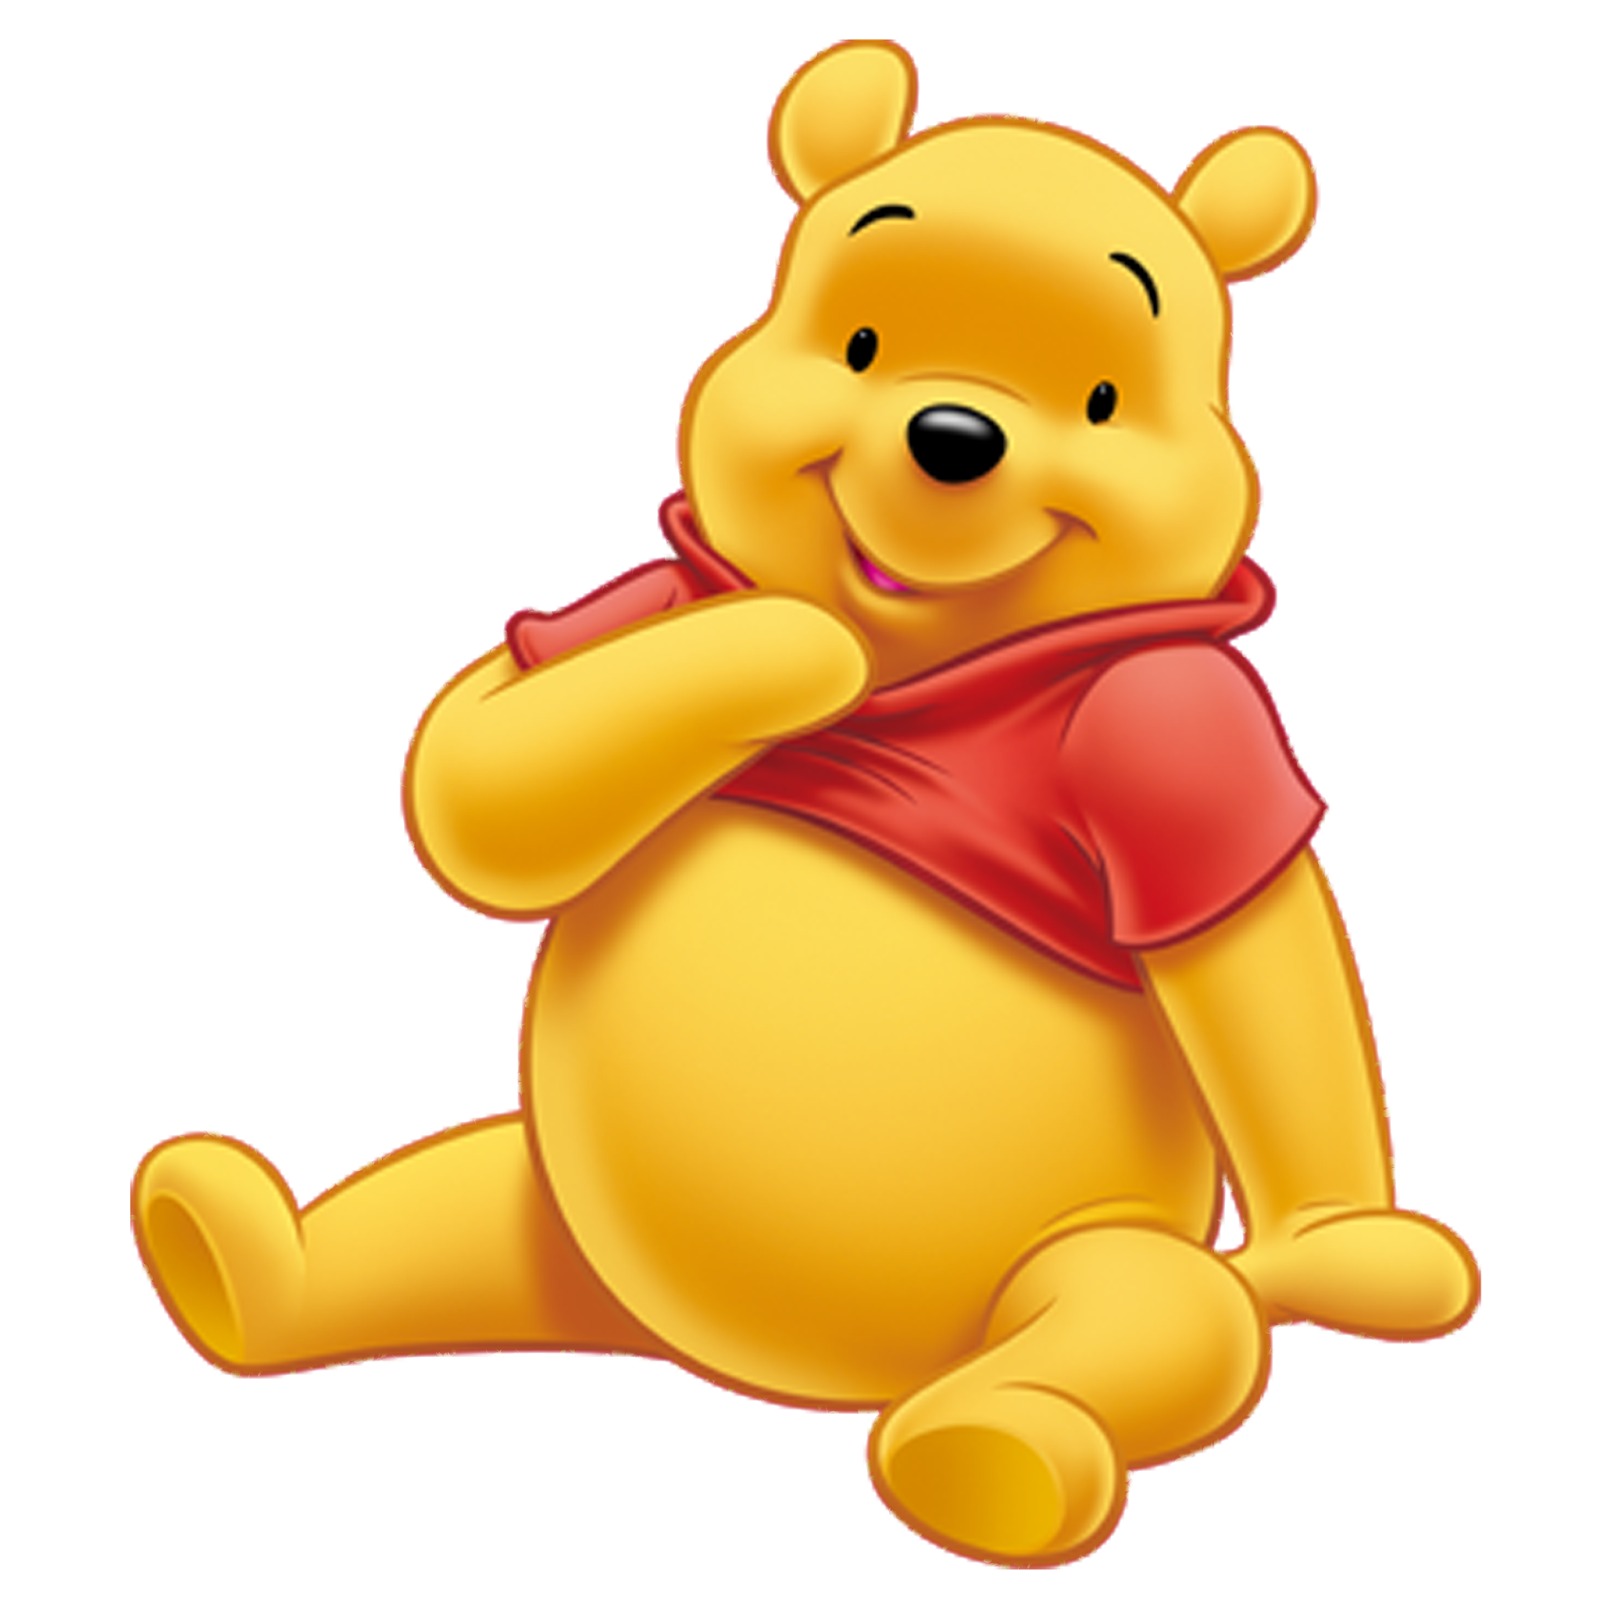 17-facts-about-pooh-bear-winnie-the-pooh